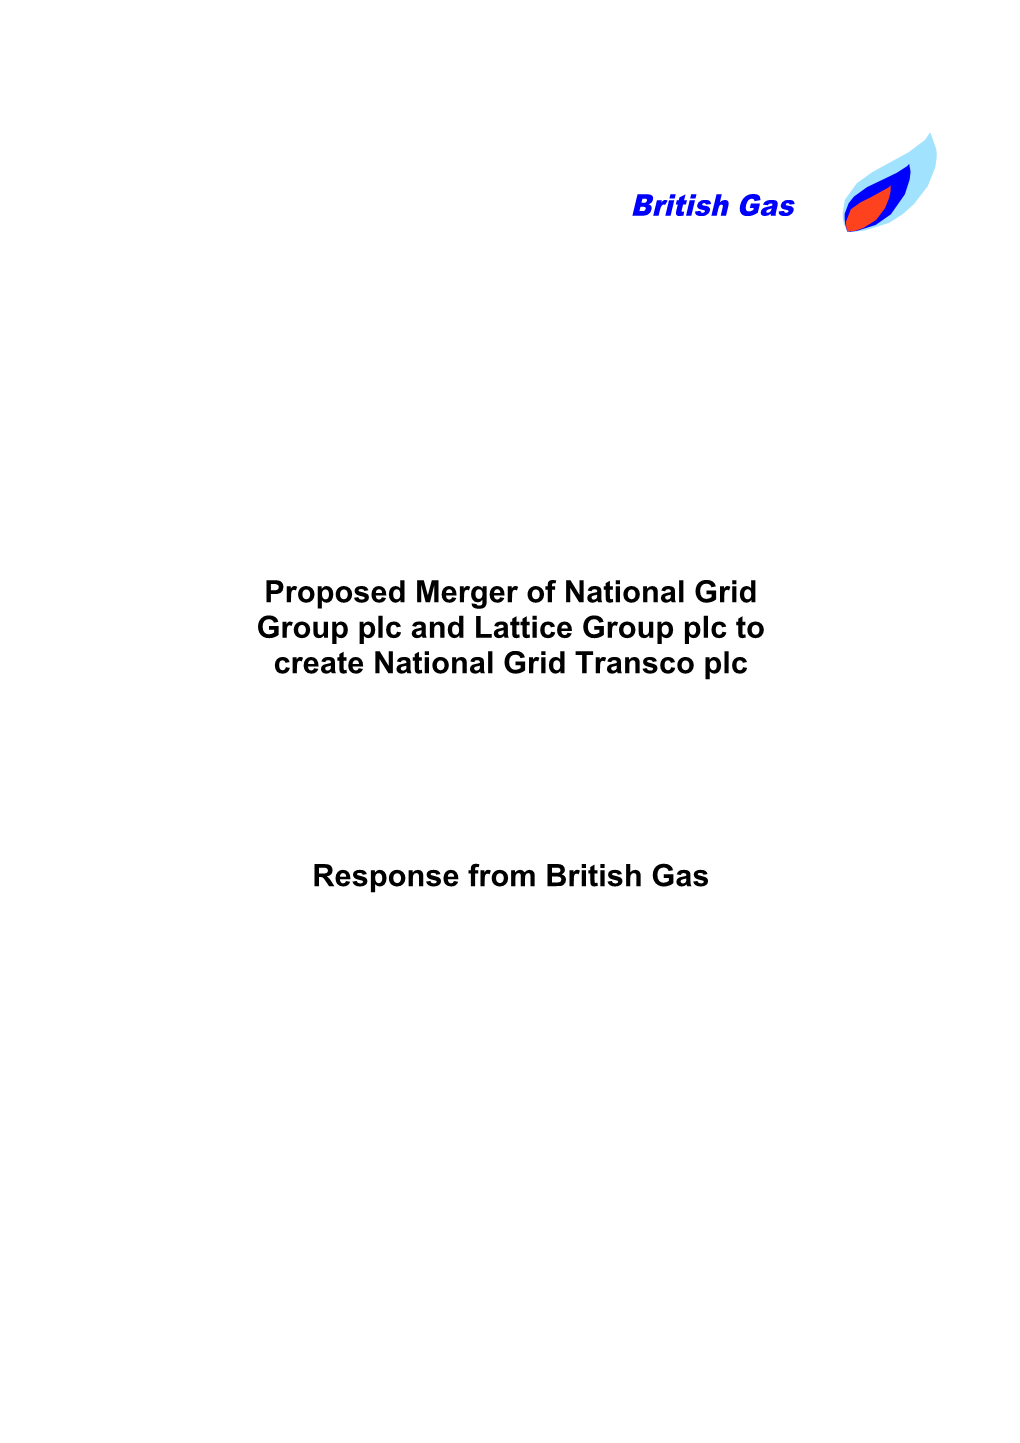 BGT - Proposed Merger of National Grid Group Plc and Lattice Group Plc to Create National